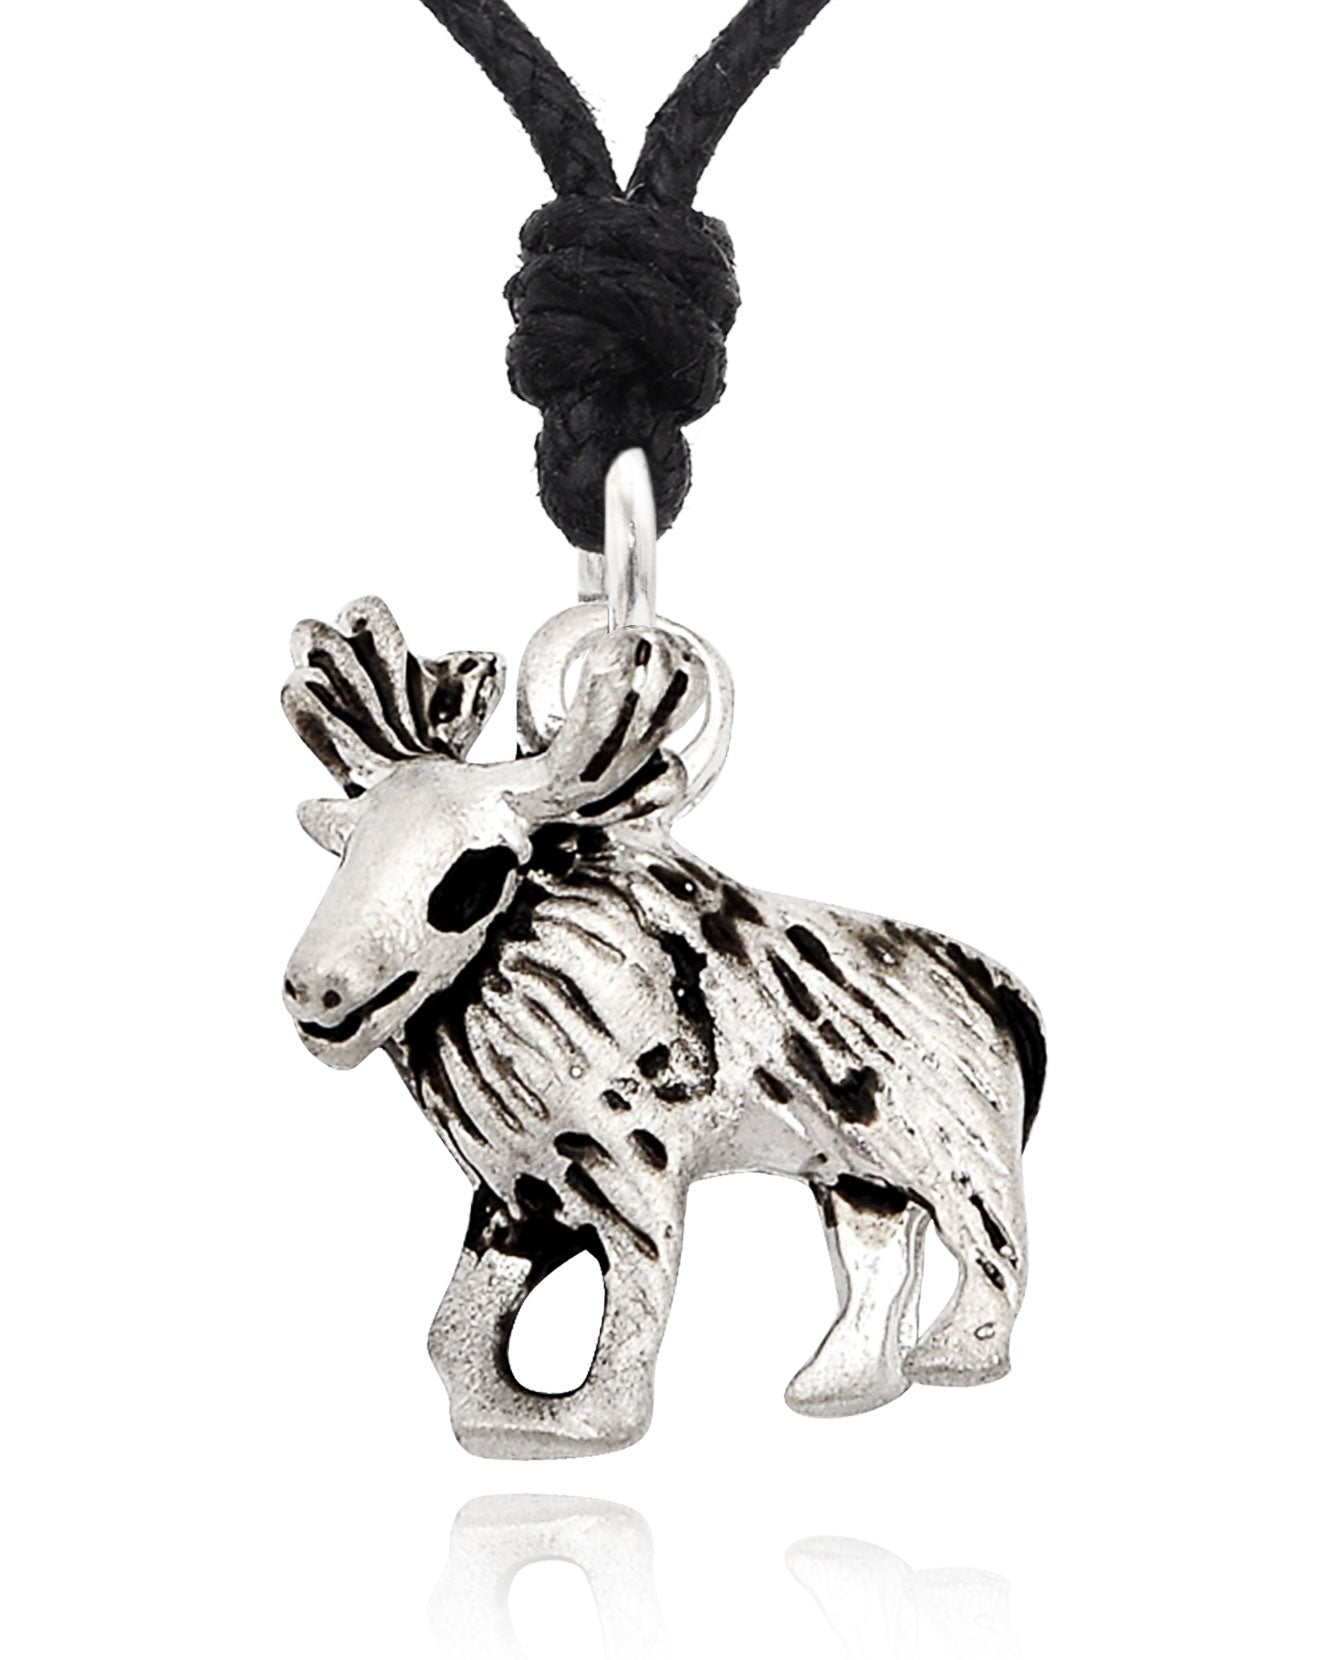 Reindeer Moose Silver Pewter Charm Necklace Pendant Jewelry With Cotton Cord